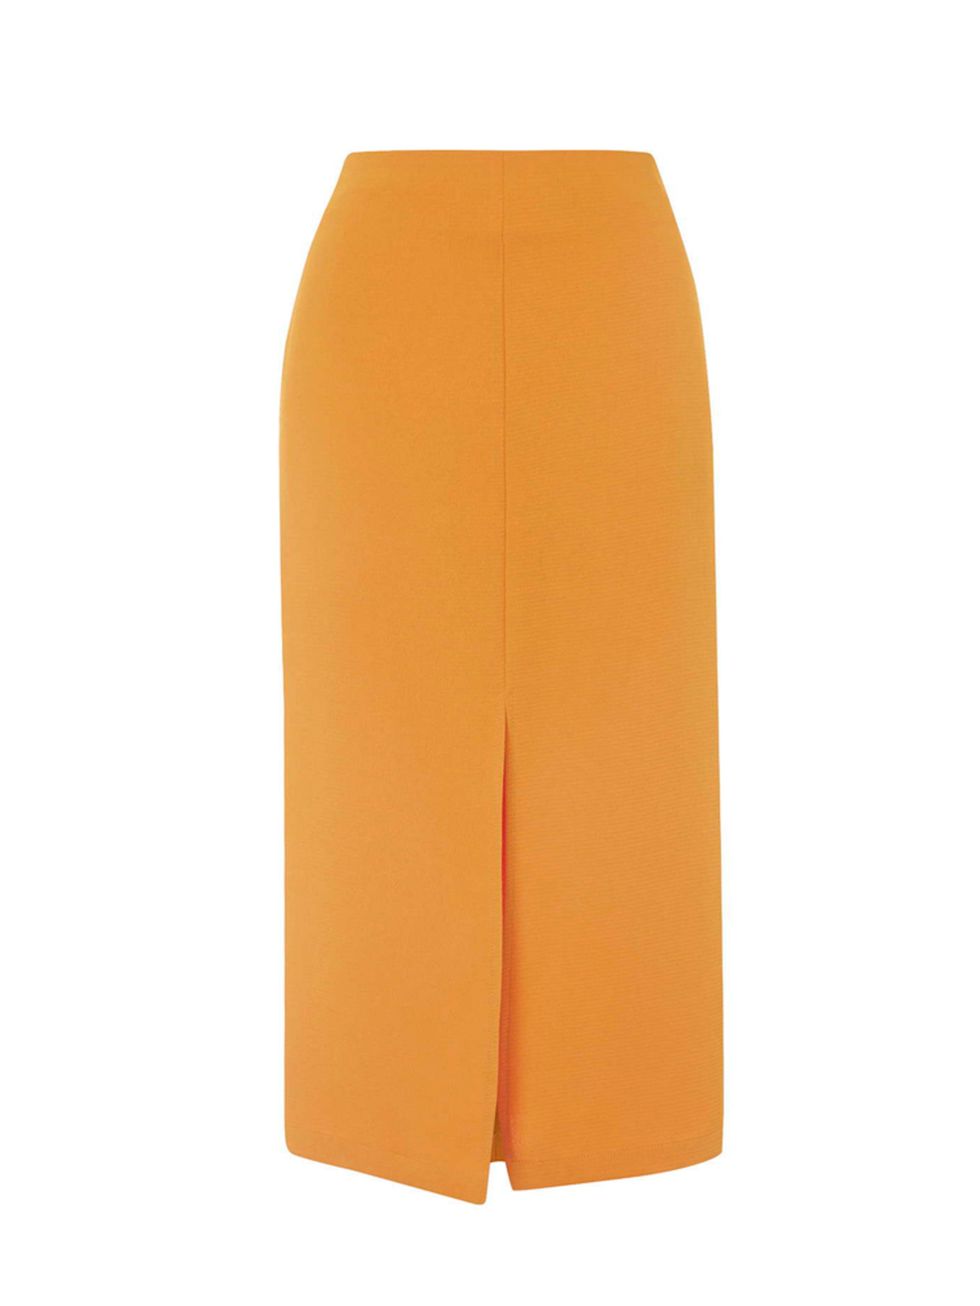 <p>Executive Fashion & Beauty Director Kirsty Dale is all over this tangerine dream. Tuck in a crisp white shirt for extra style points.</p>

<p><a href="http://www.topshop.com/en/tsuk/product/new-in-this-week-2169932/split-front-midi-skirt-4546149?bi=1&p